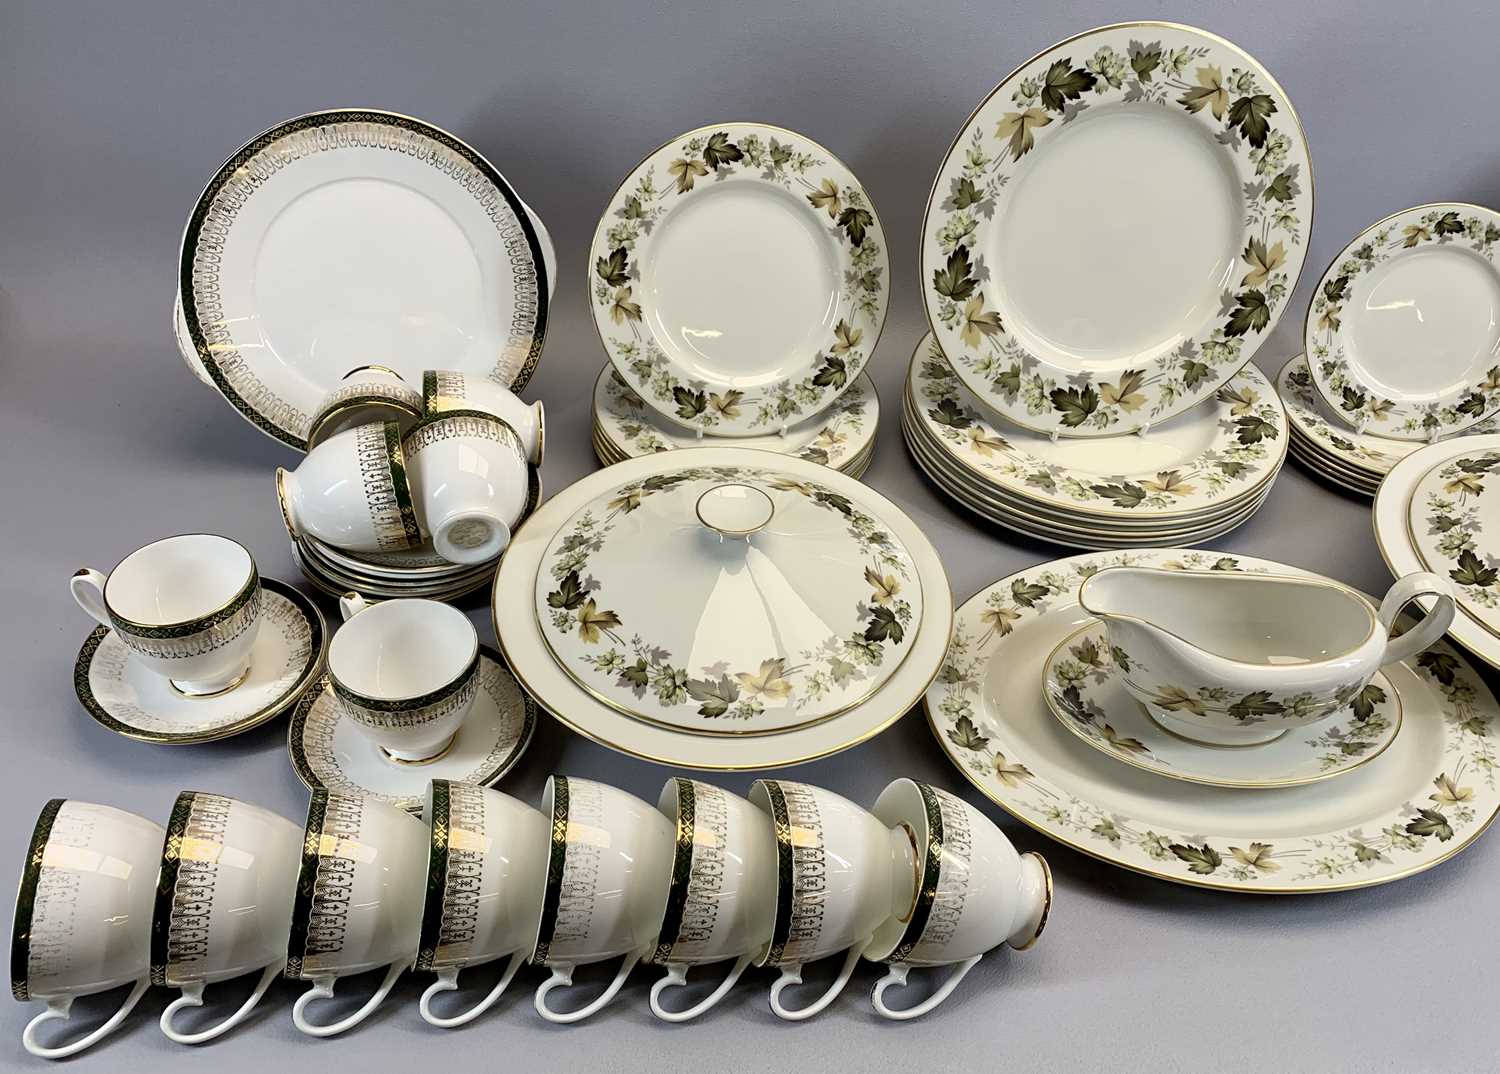 ROYAL DOULTON LARCHMONT PATTERN DINNER SERVICE - two circular lidded tureens, oval serving plate, - Image 2 of 3